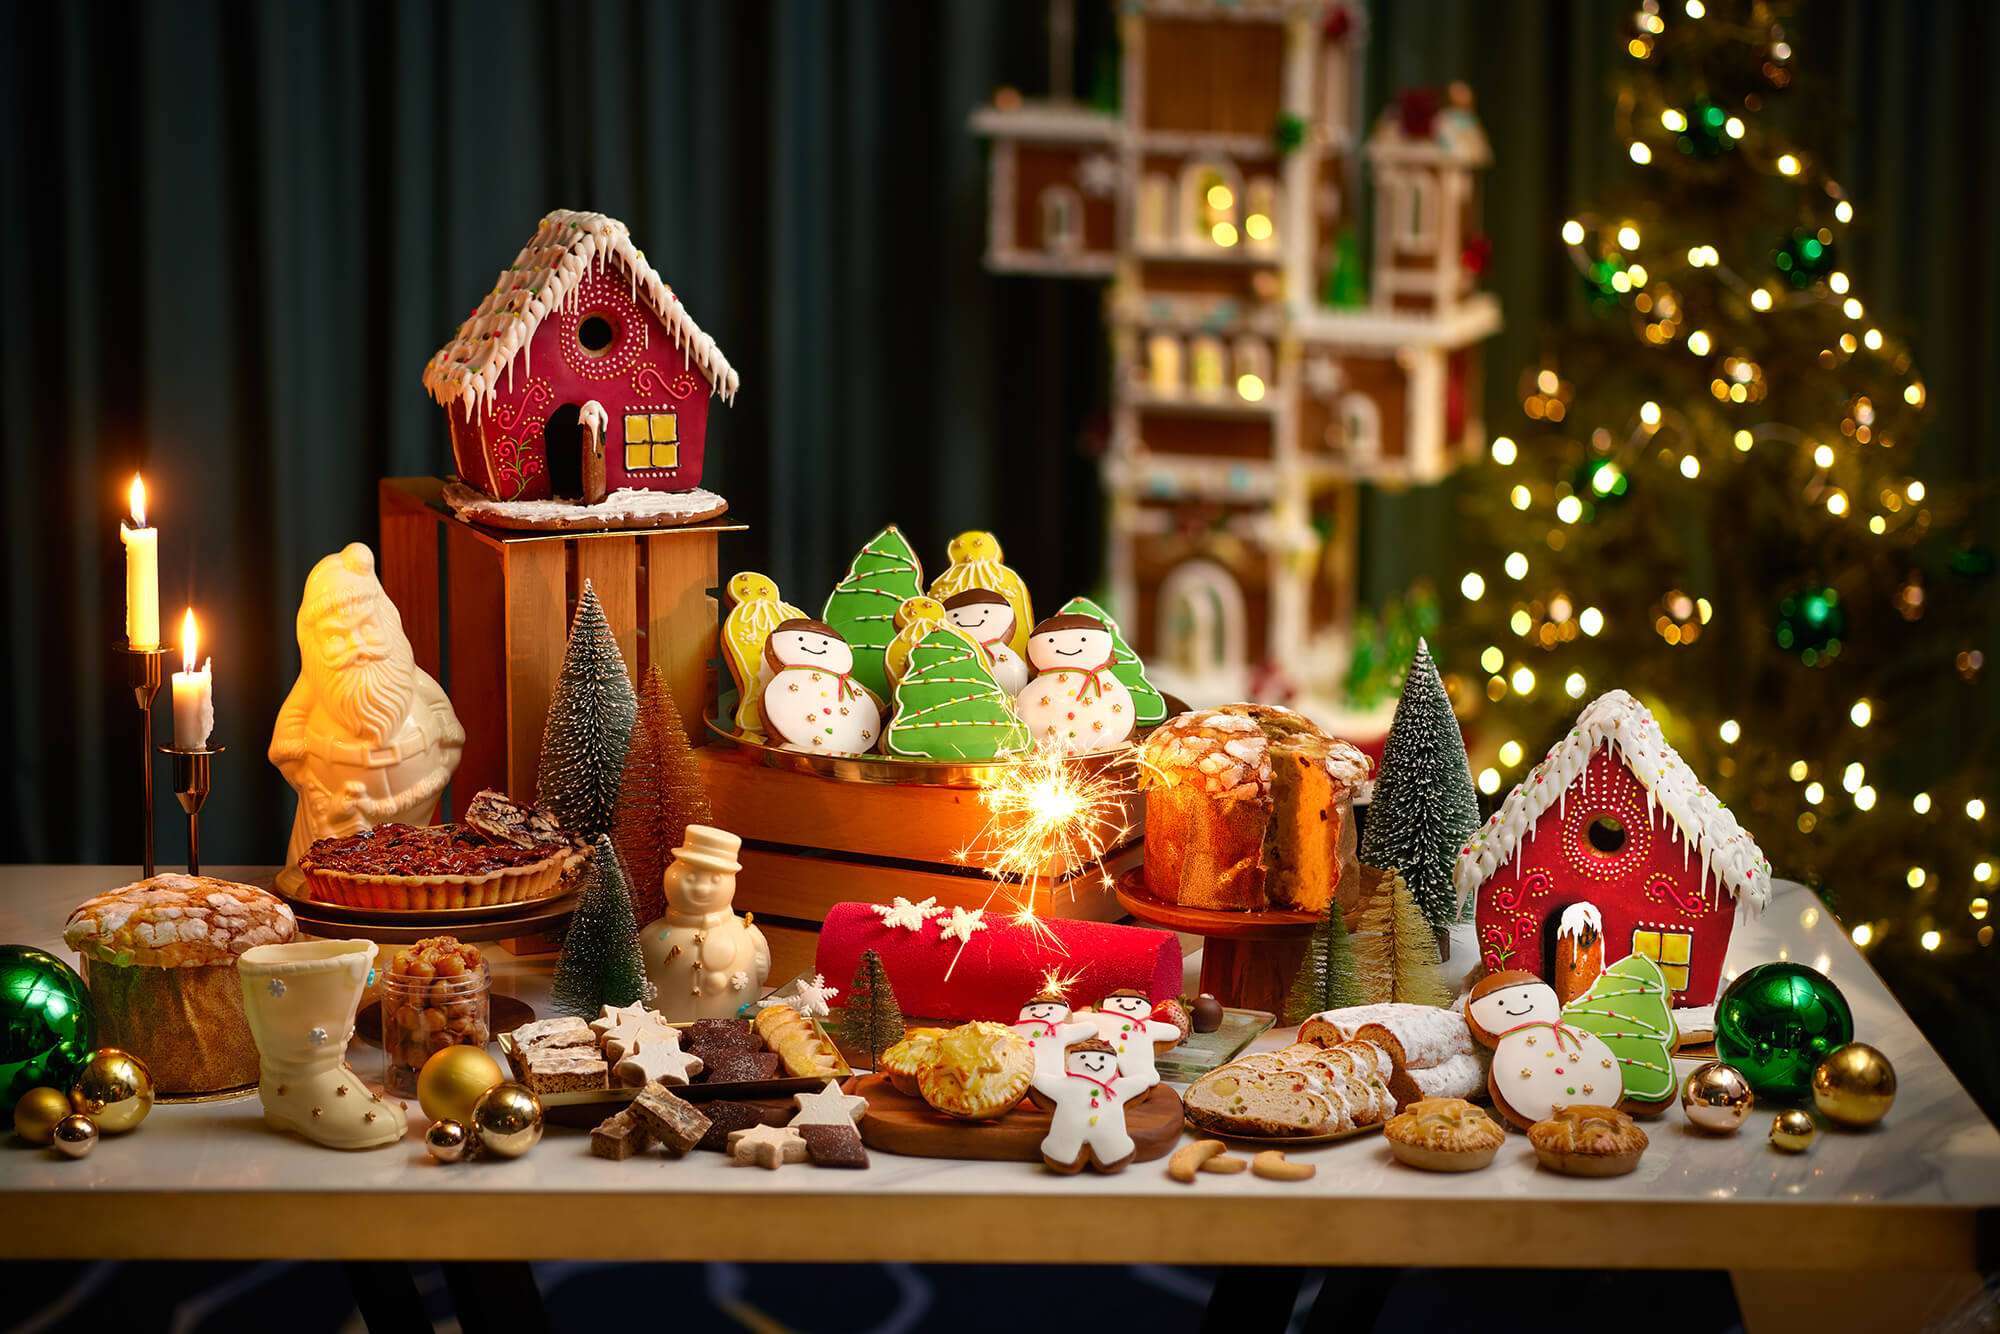 Christmas calories don’t count! How can you resist these delectable seasonal treats? Sunway Resort Hotel